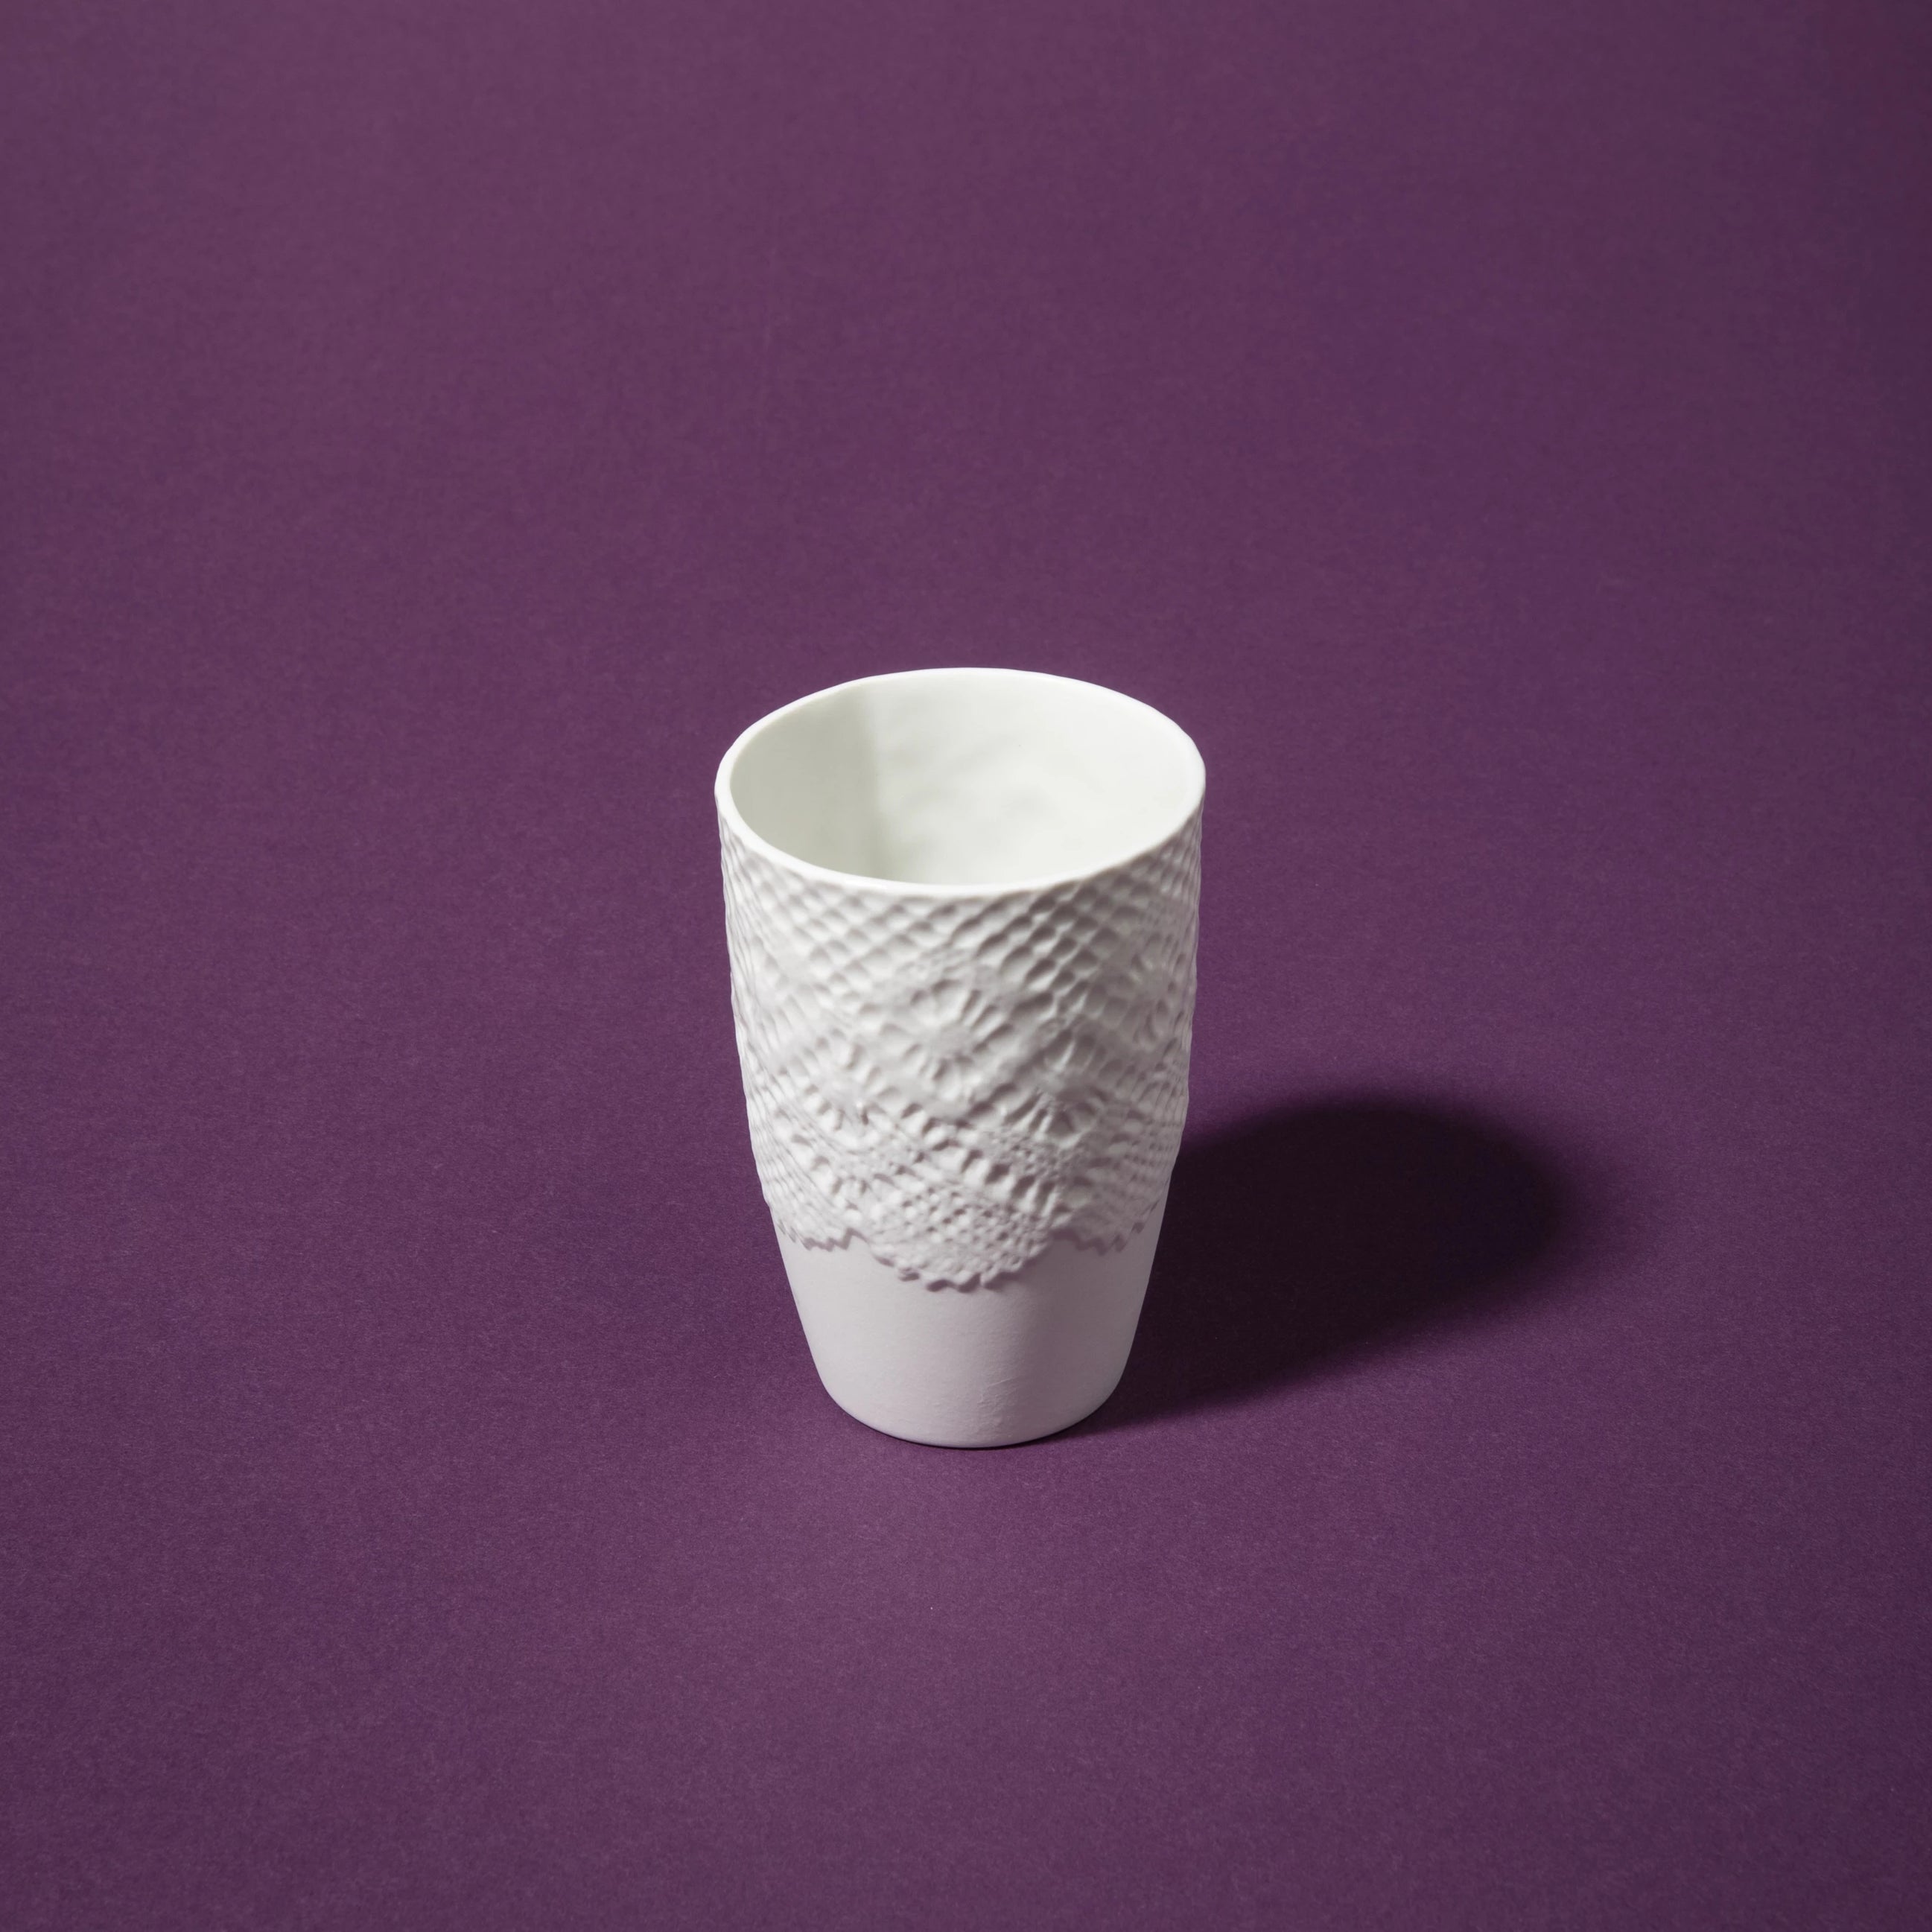 Porcelain Mug Inspired by Lace from Rembrandt painting official Rijksmuseum Shop